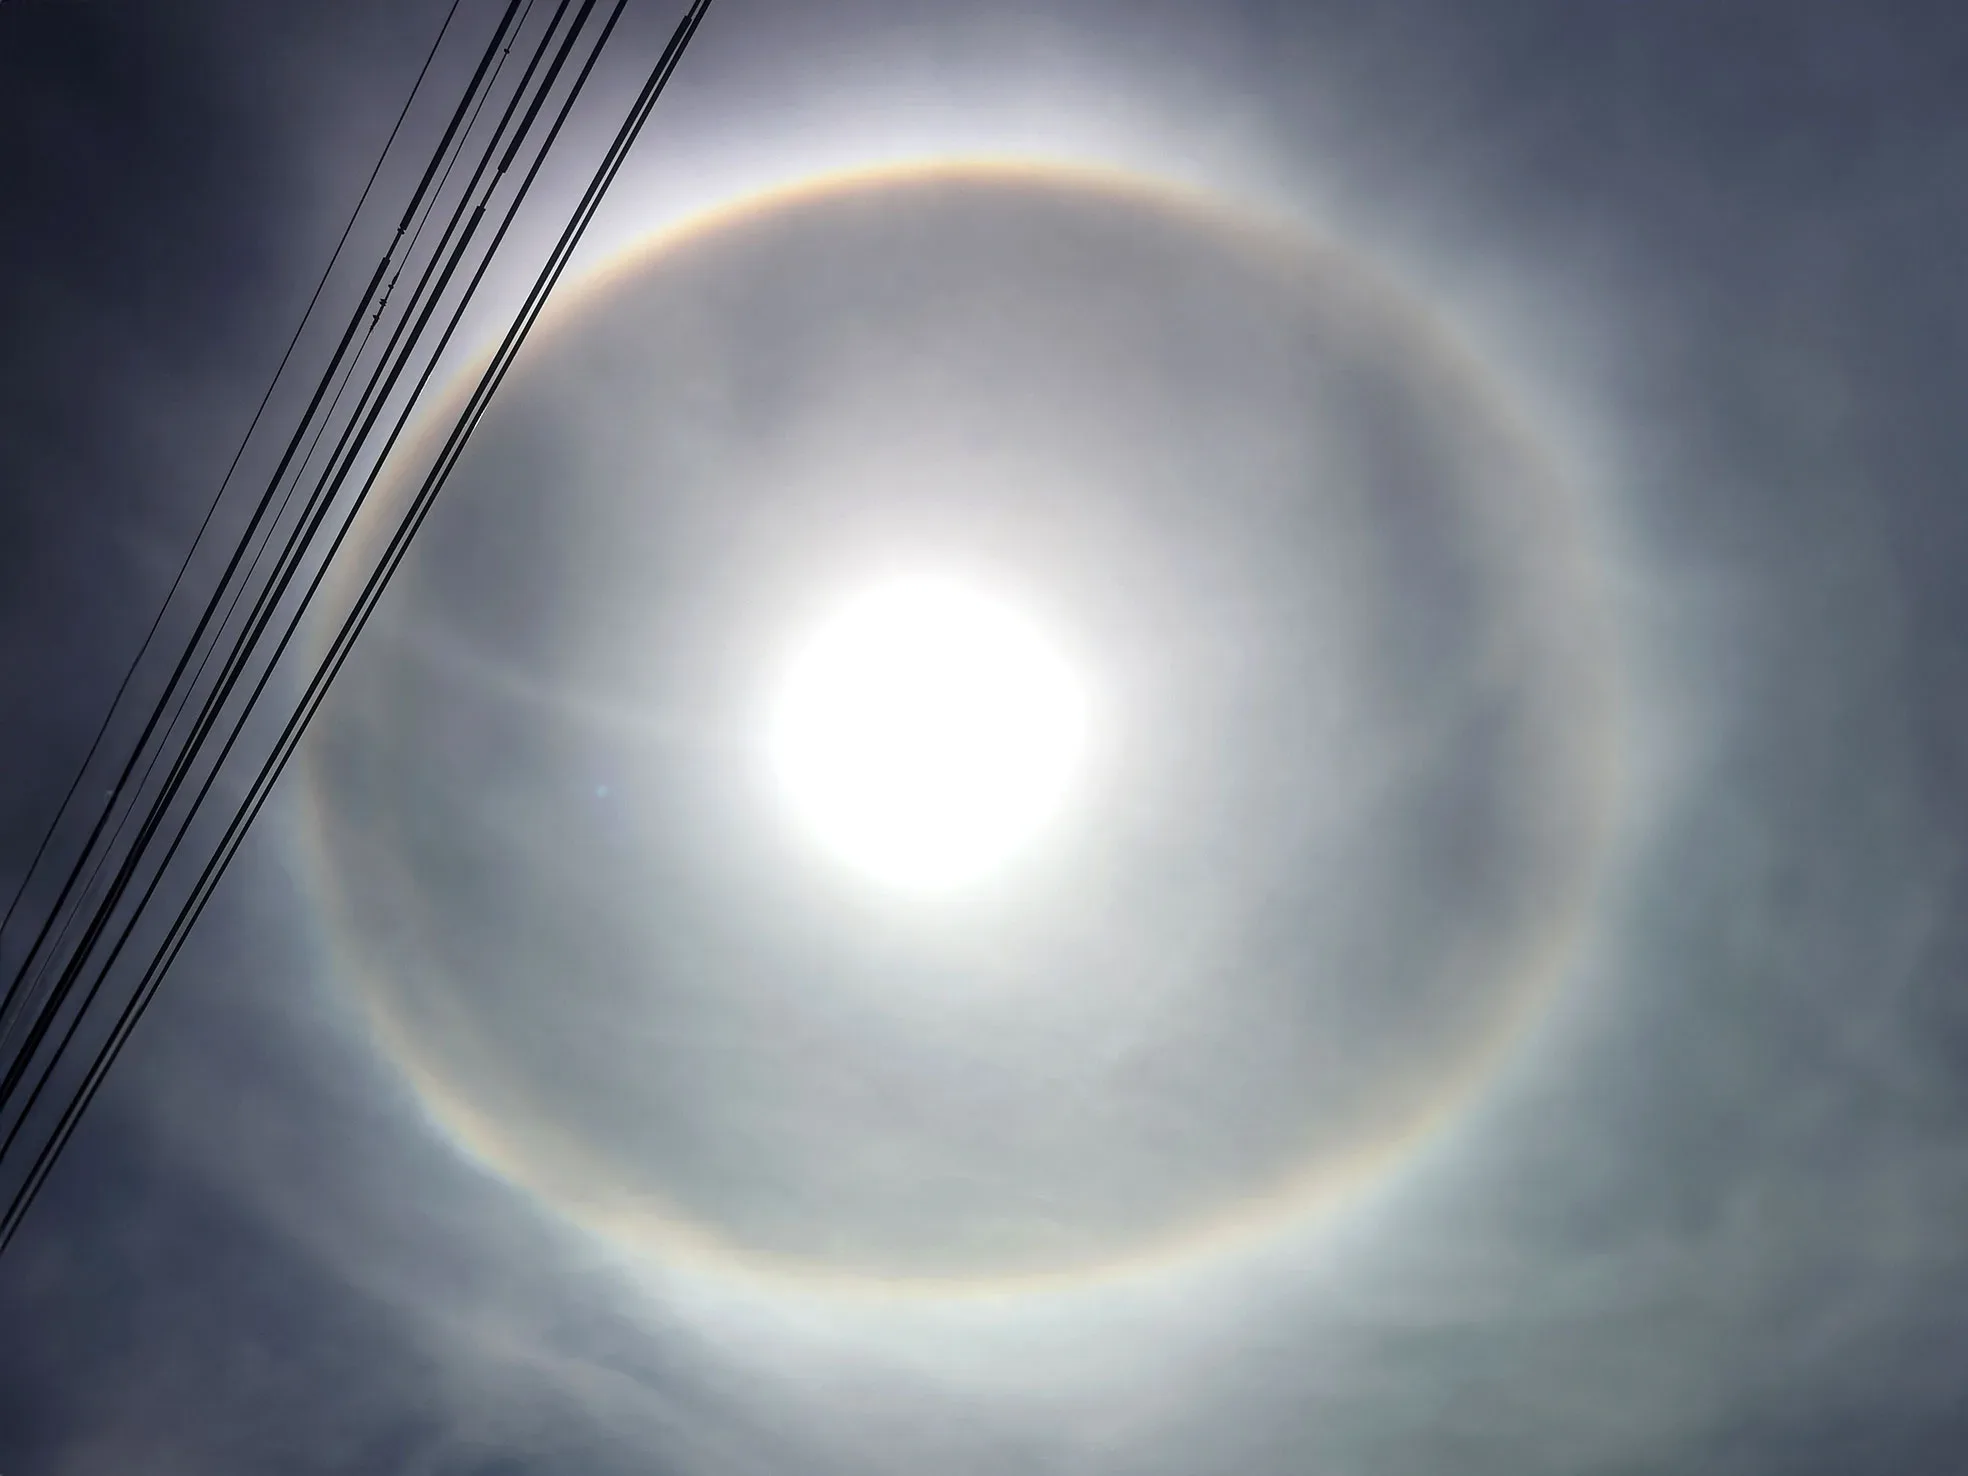 Sun Halo Over Chico: Photo Of The Day | Chico, CA Patch